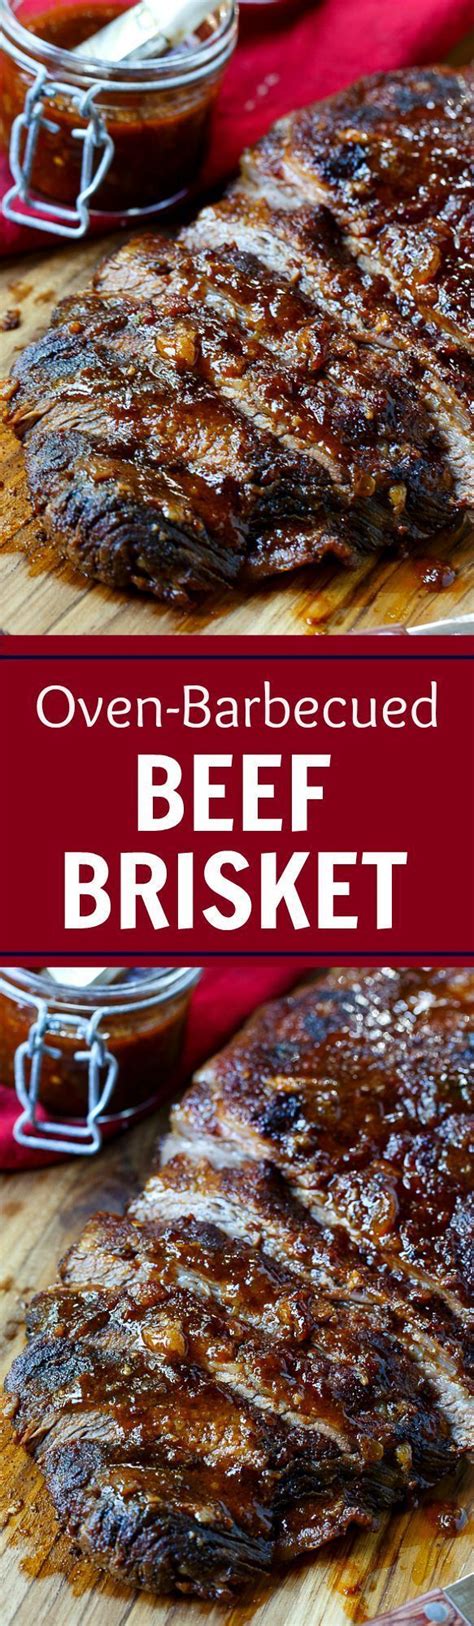 Serve brisket cooked in beef stock or beer with a cup of the leftover juices as an au jus, or drizzled over shredded preparations. Oven-Barbecued Beef Brisket | Recipe | Beef recipes, Food ...